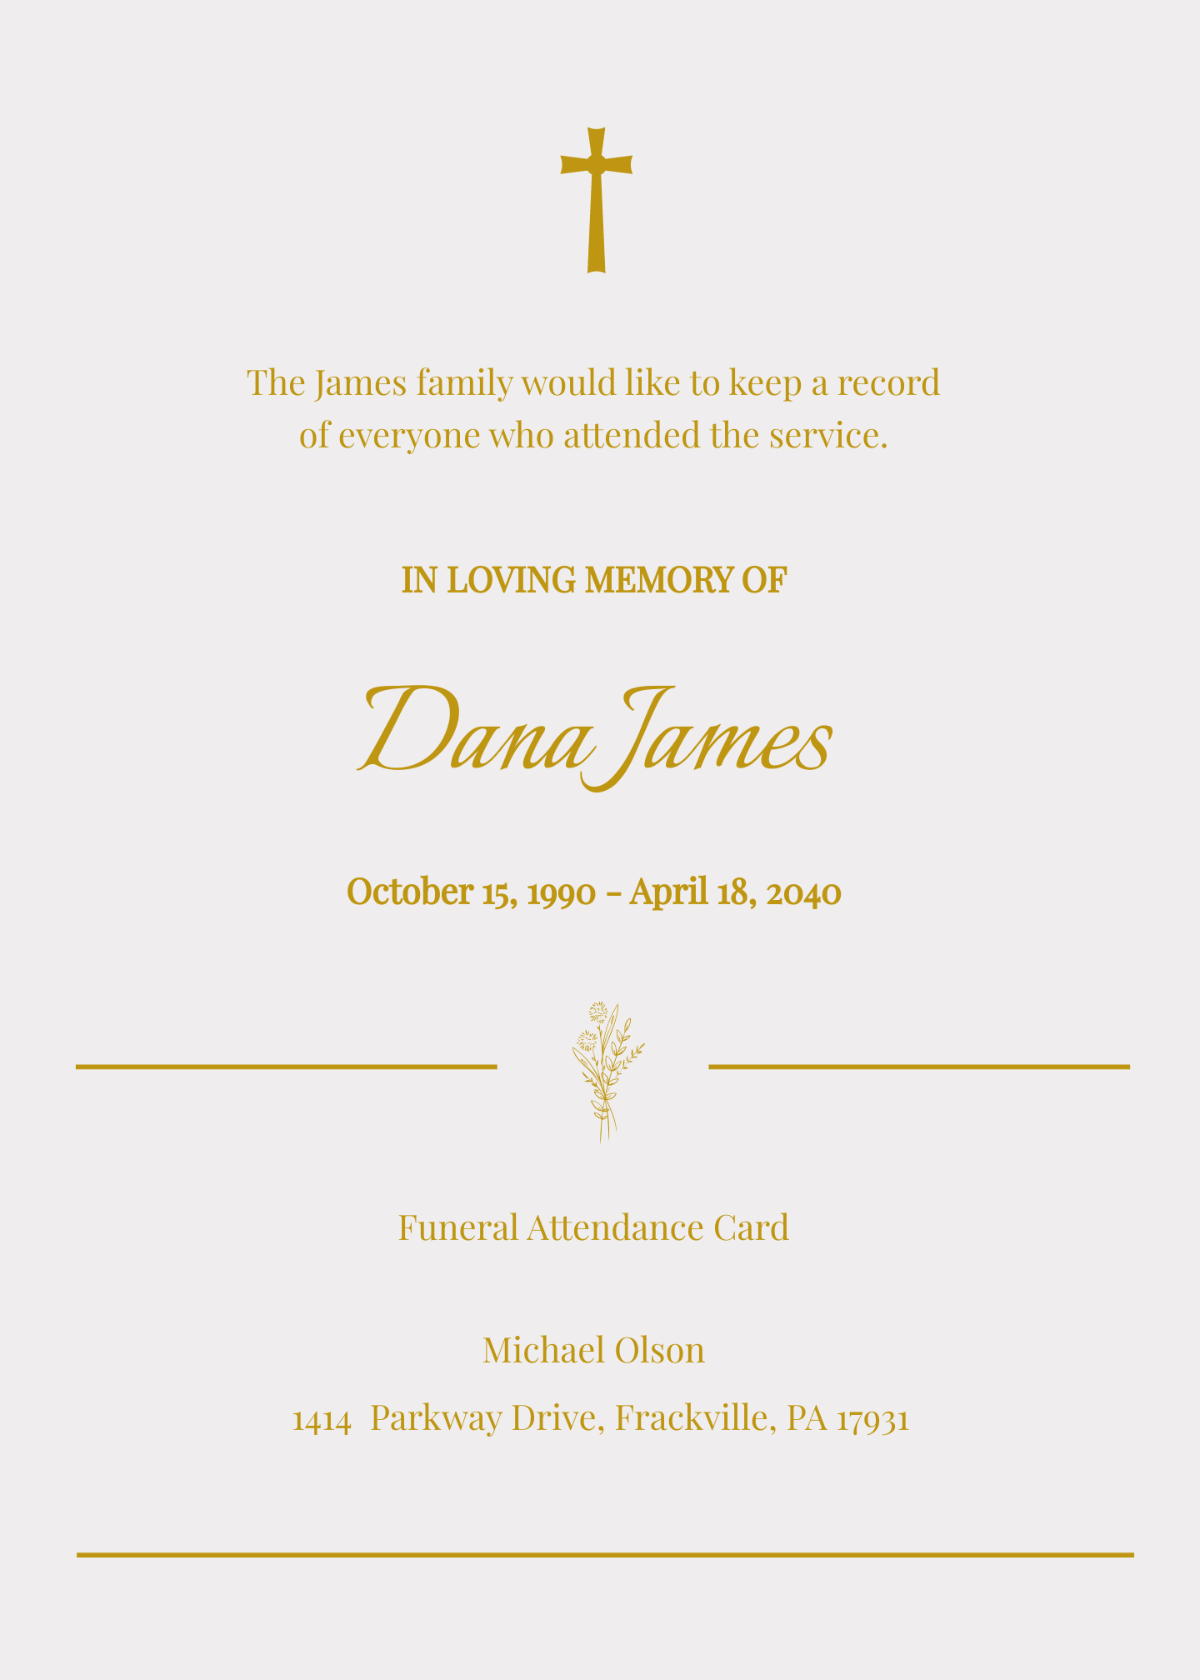 Simple Funeral Attendance Card Template